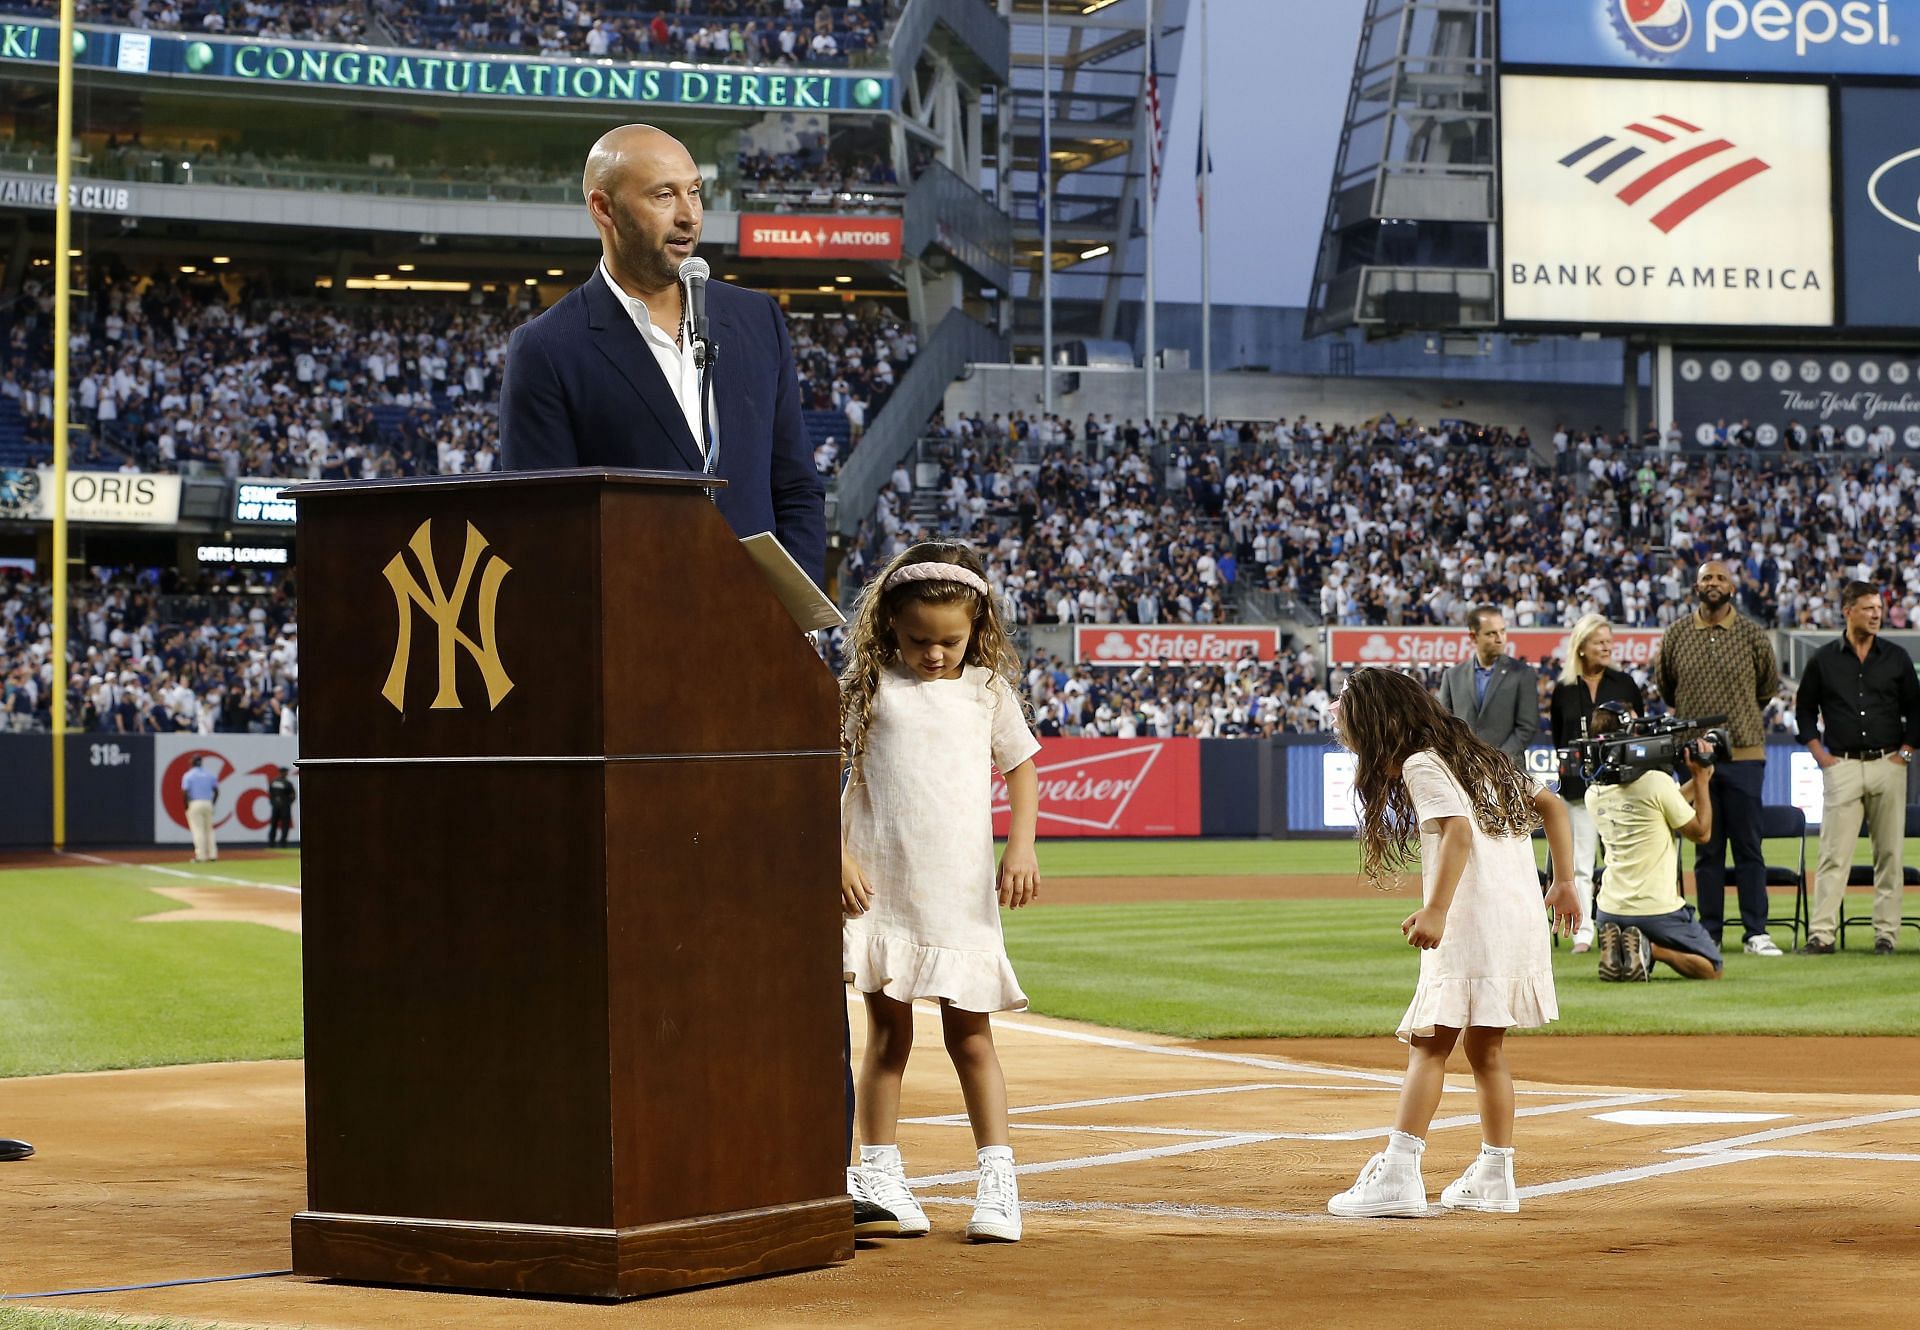 Derek Jeter's Days as Yankees' Leadoff Hitter Should End Upon His Return, News, Scores, Highlights, Stats, and Rumors